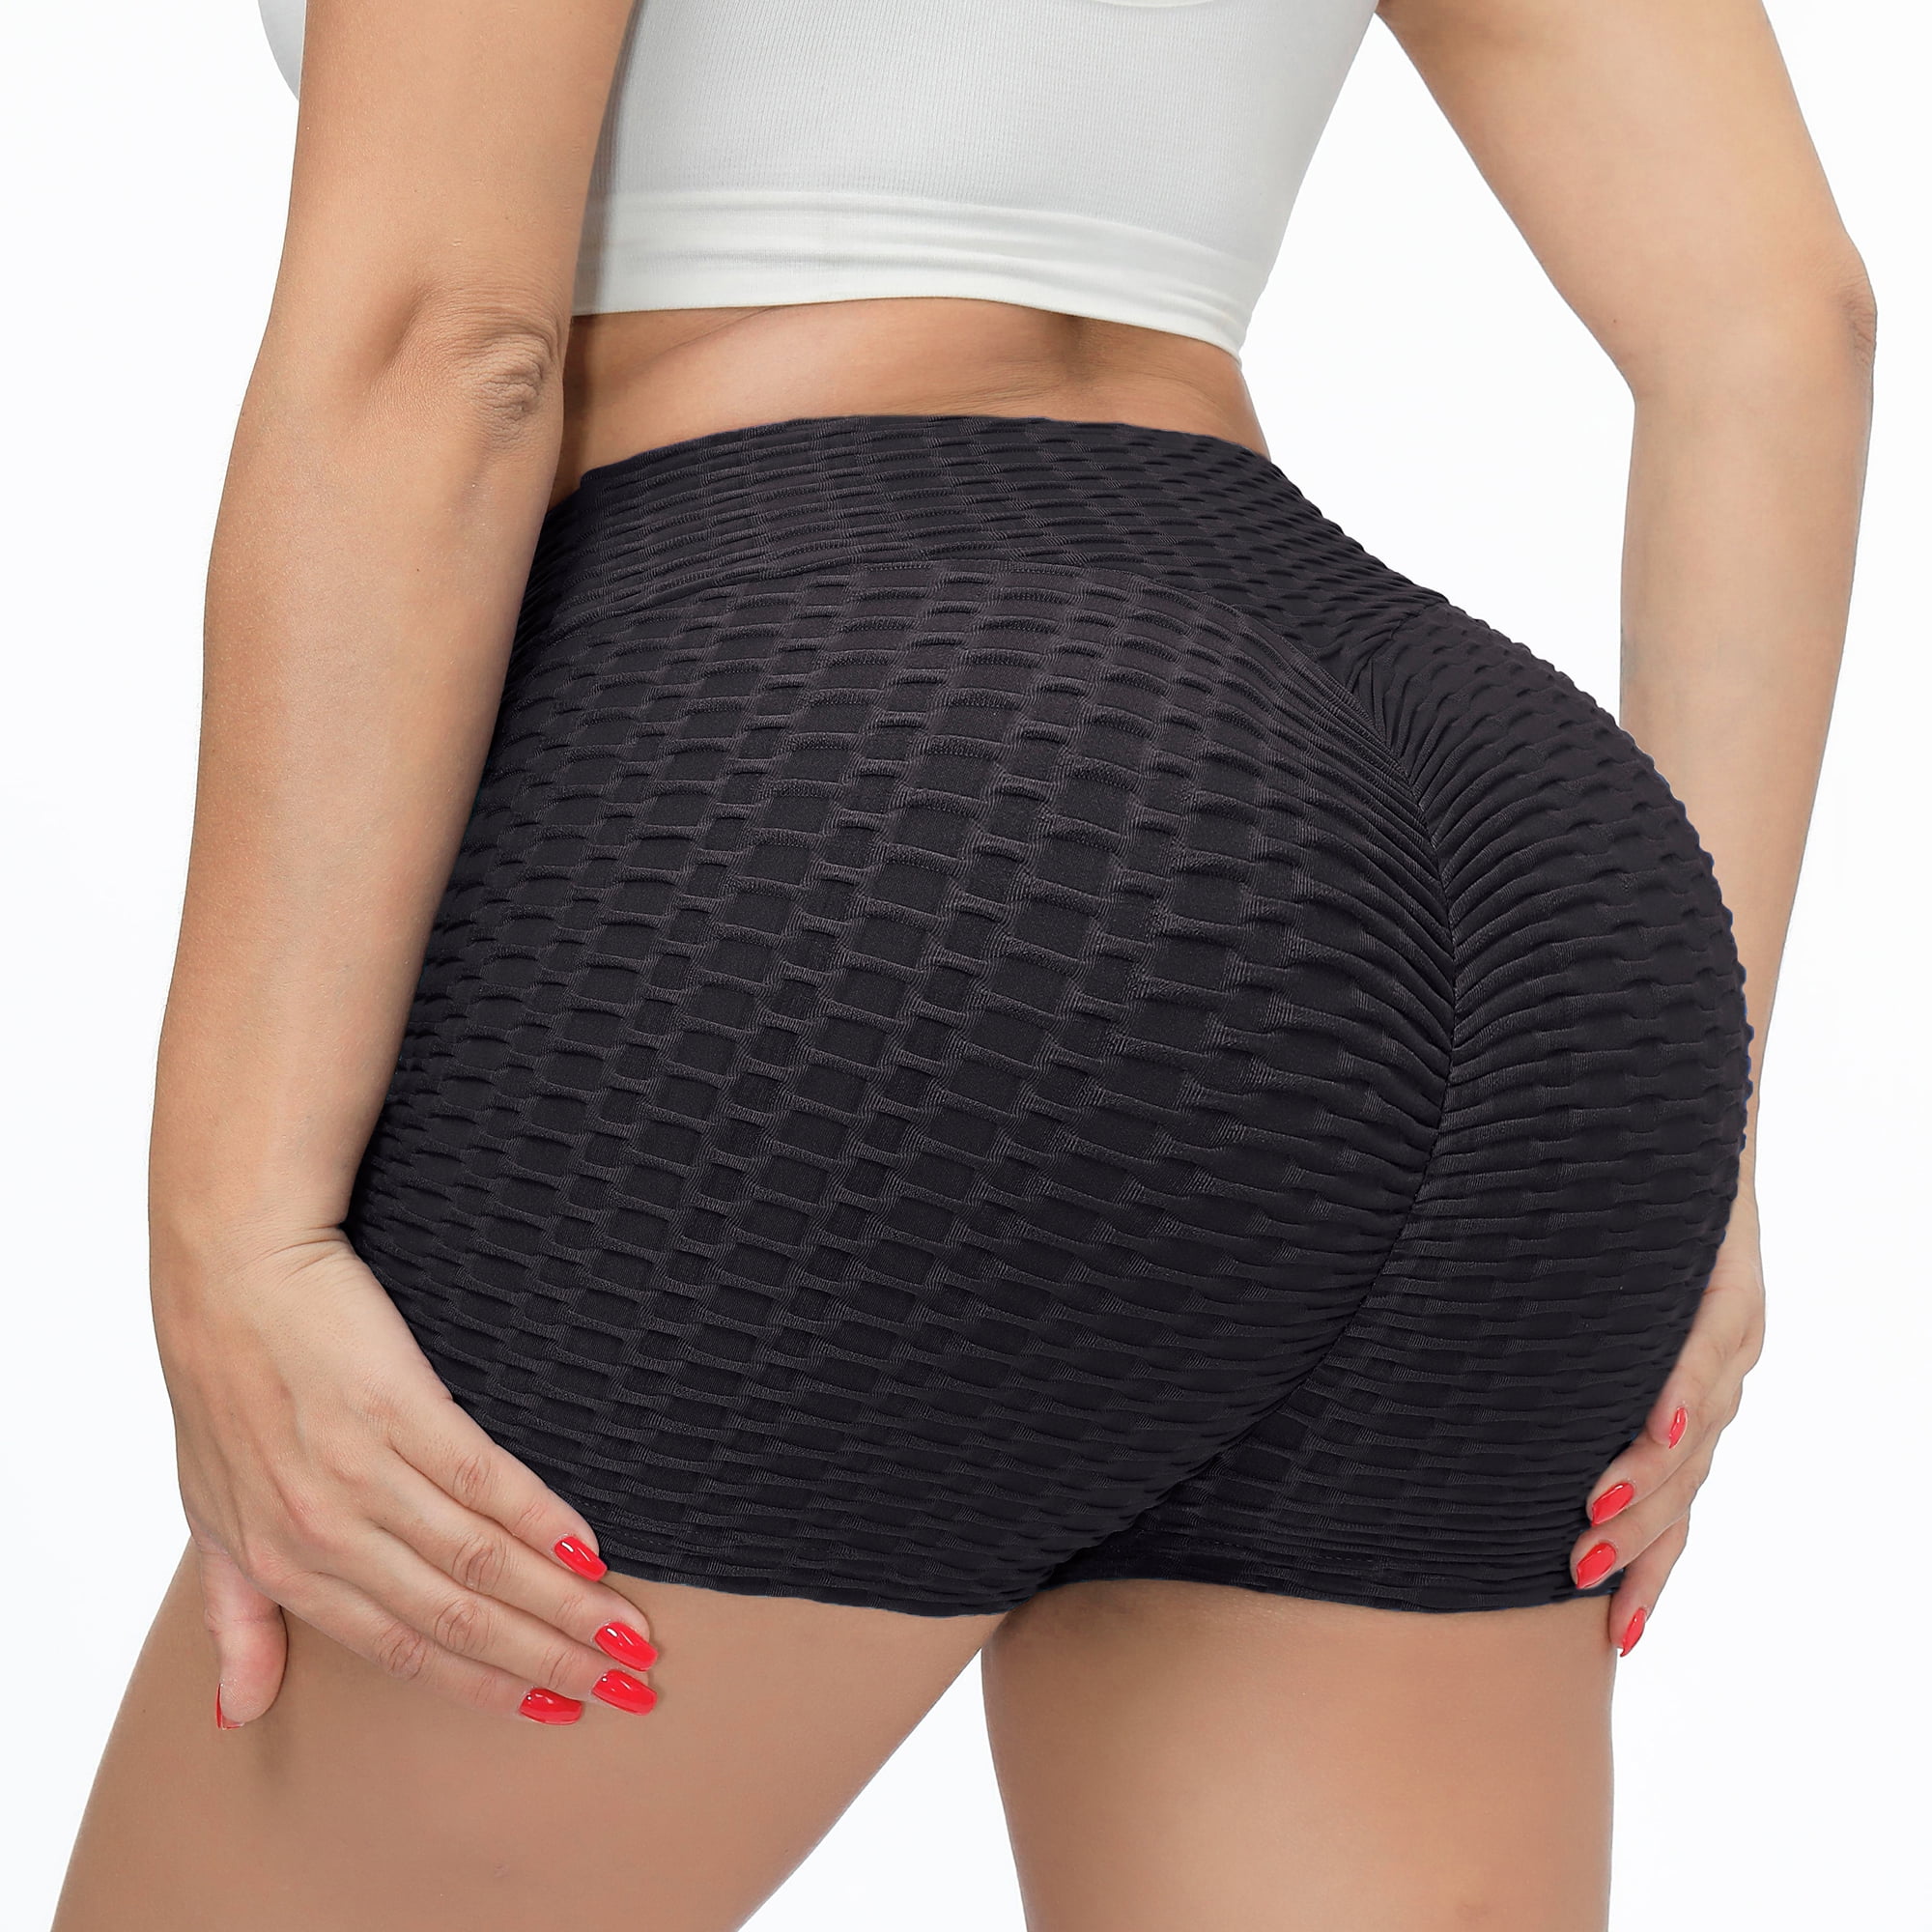 VENUZOR Women Yoga Shorts Ruched Sexy Butt Lifting Anti Cellulite Shorts  Booty Scrunch Textured Workout Shorts 